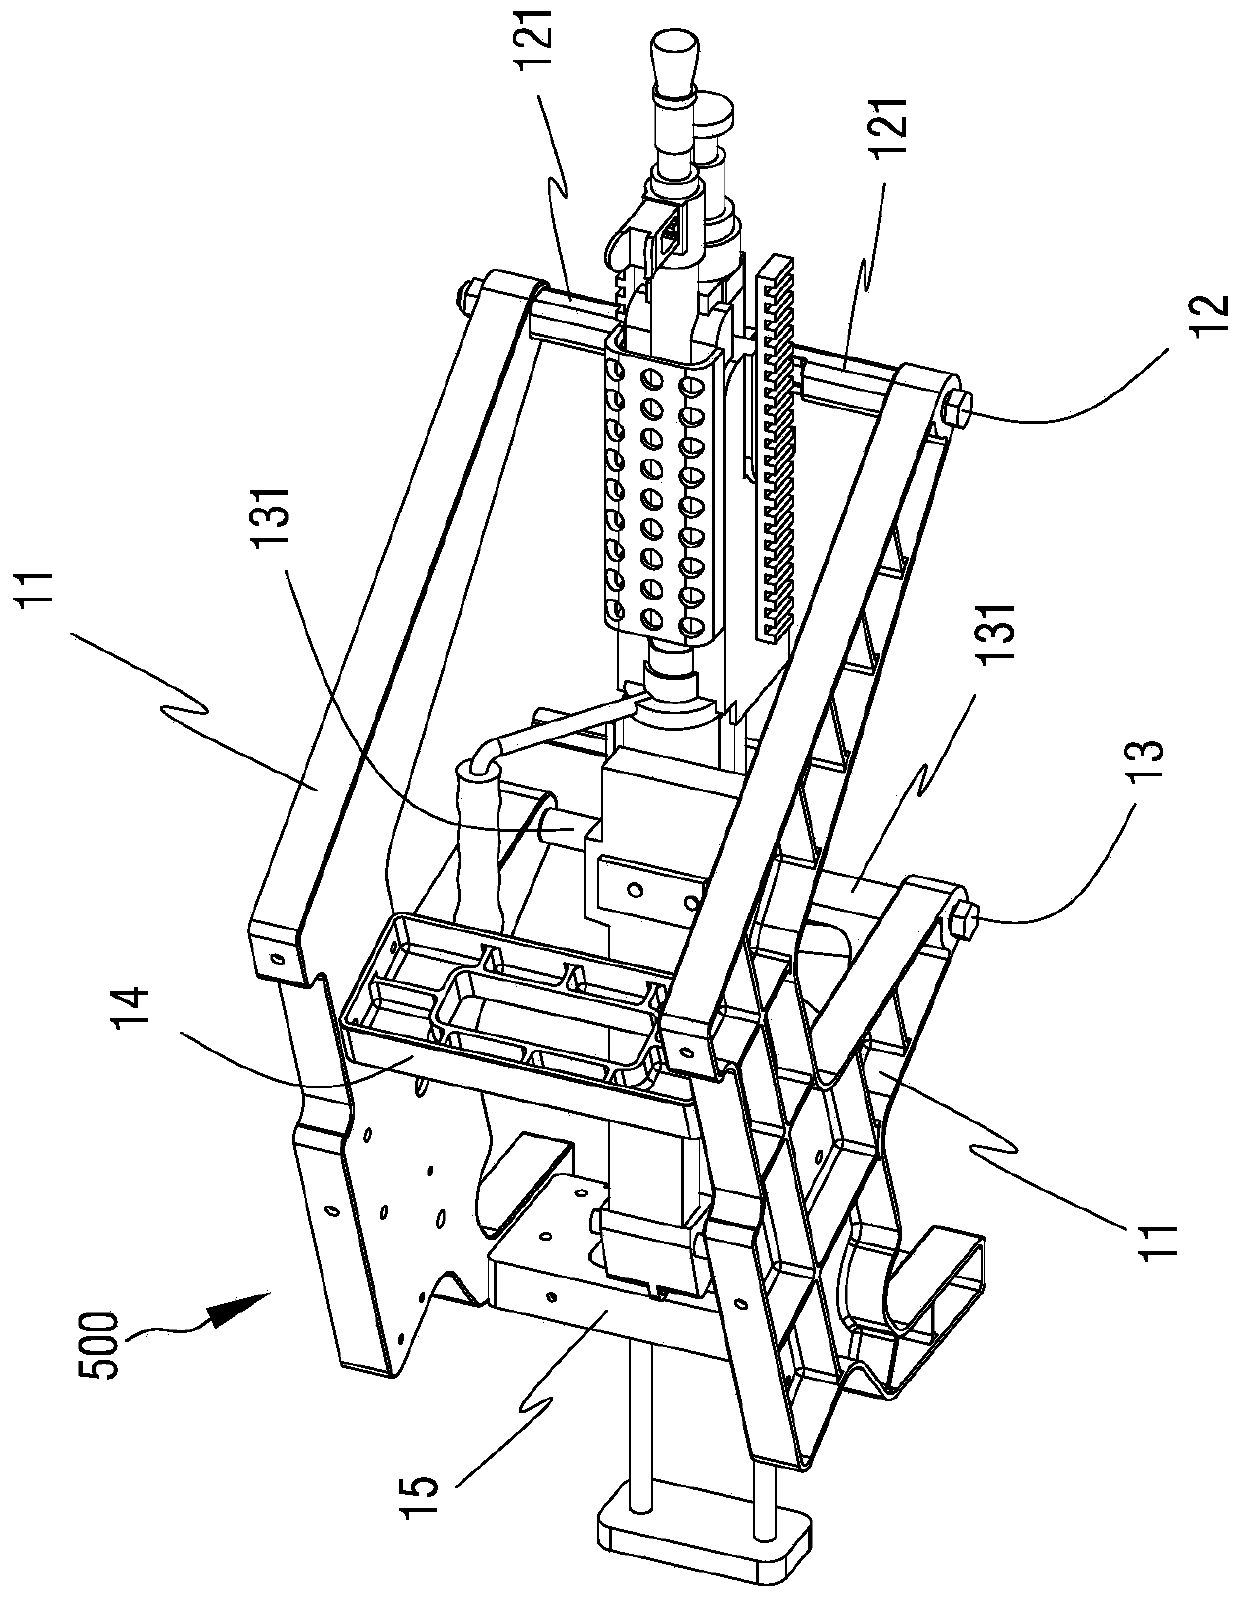 Machine gun mounting and driving structure for unmanned aerial vehicle